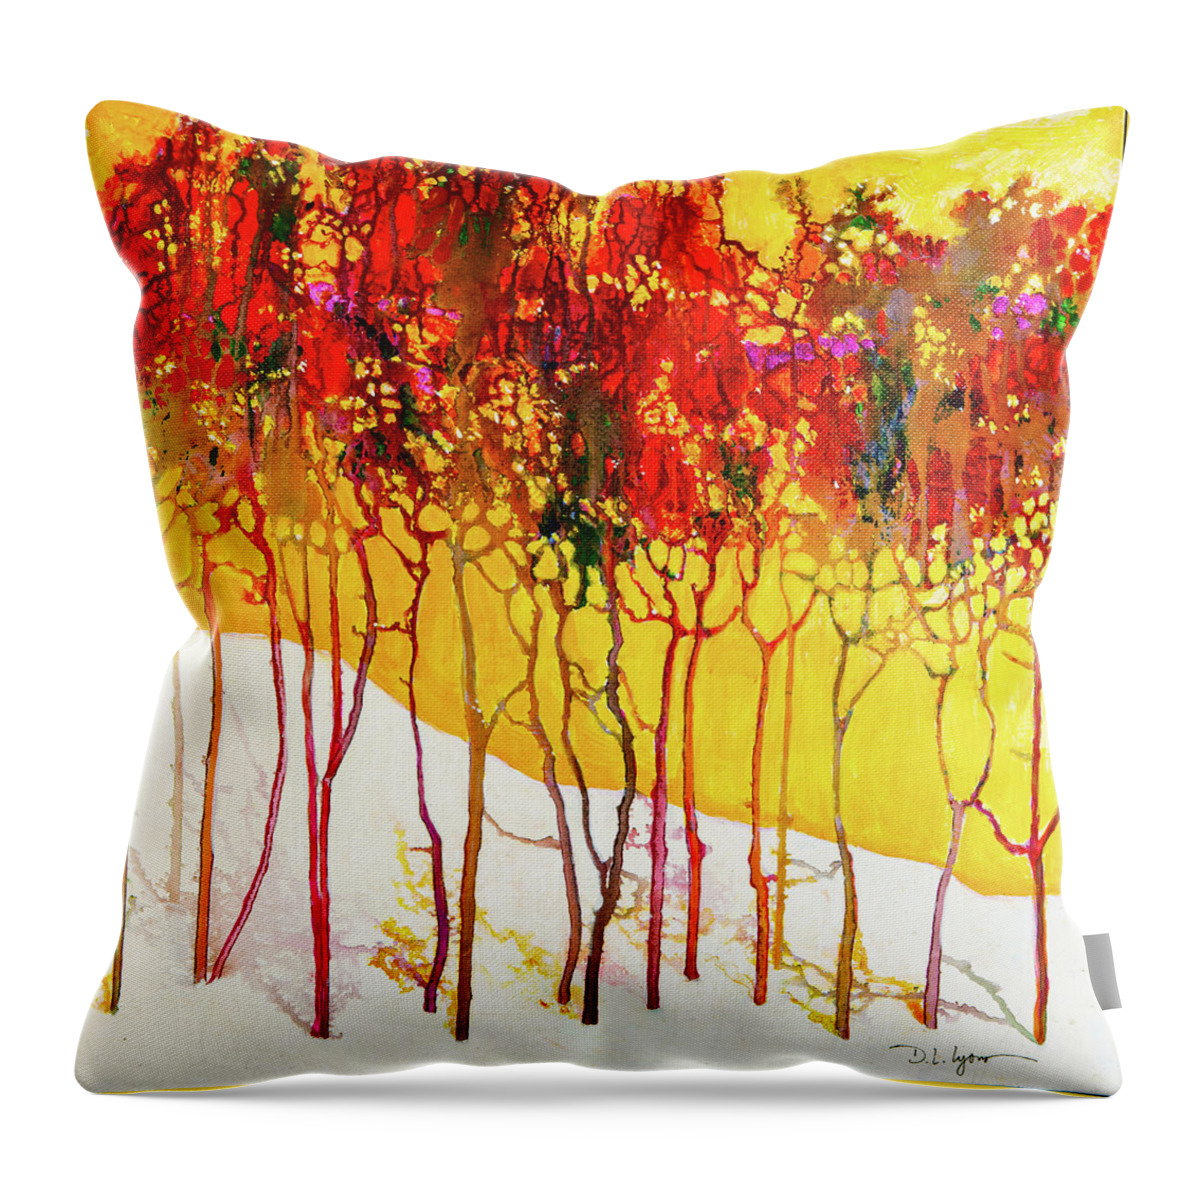 Abstract Throw Pillow featuring the digital art Autumns Last Mosaic - Abstract Contemporary Acrylic Painting by Sambel Pedes